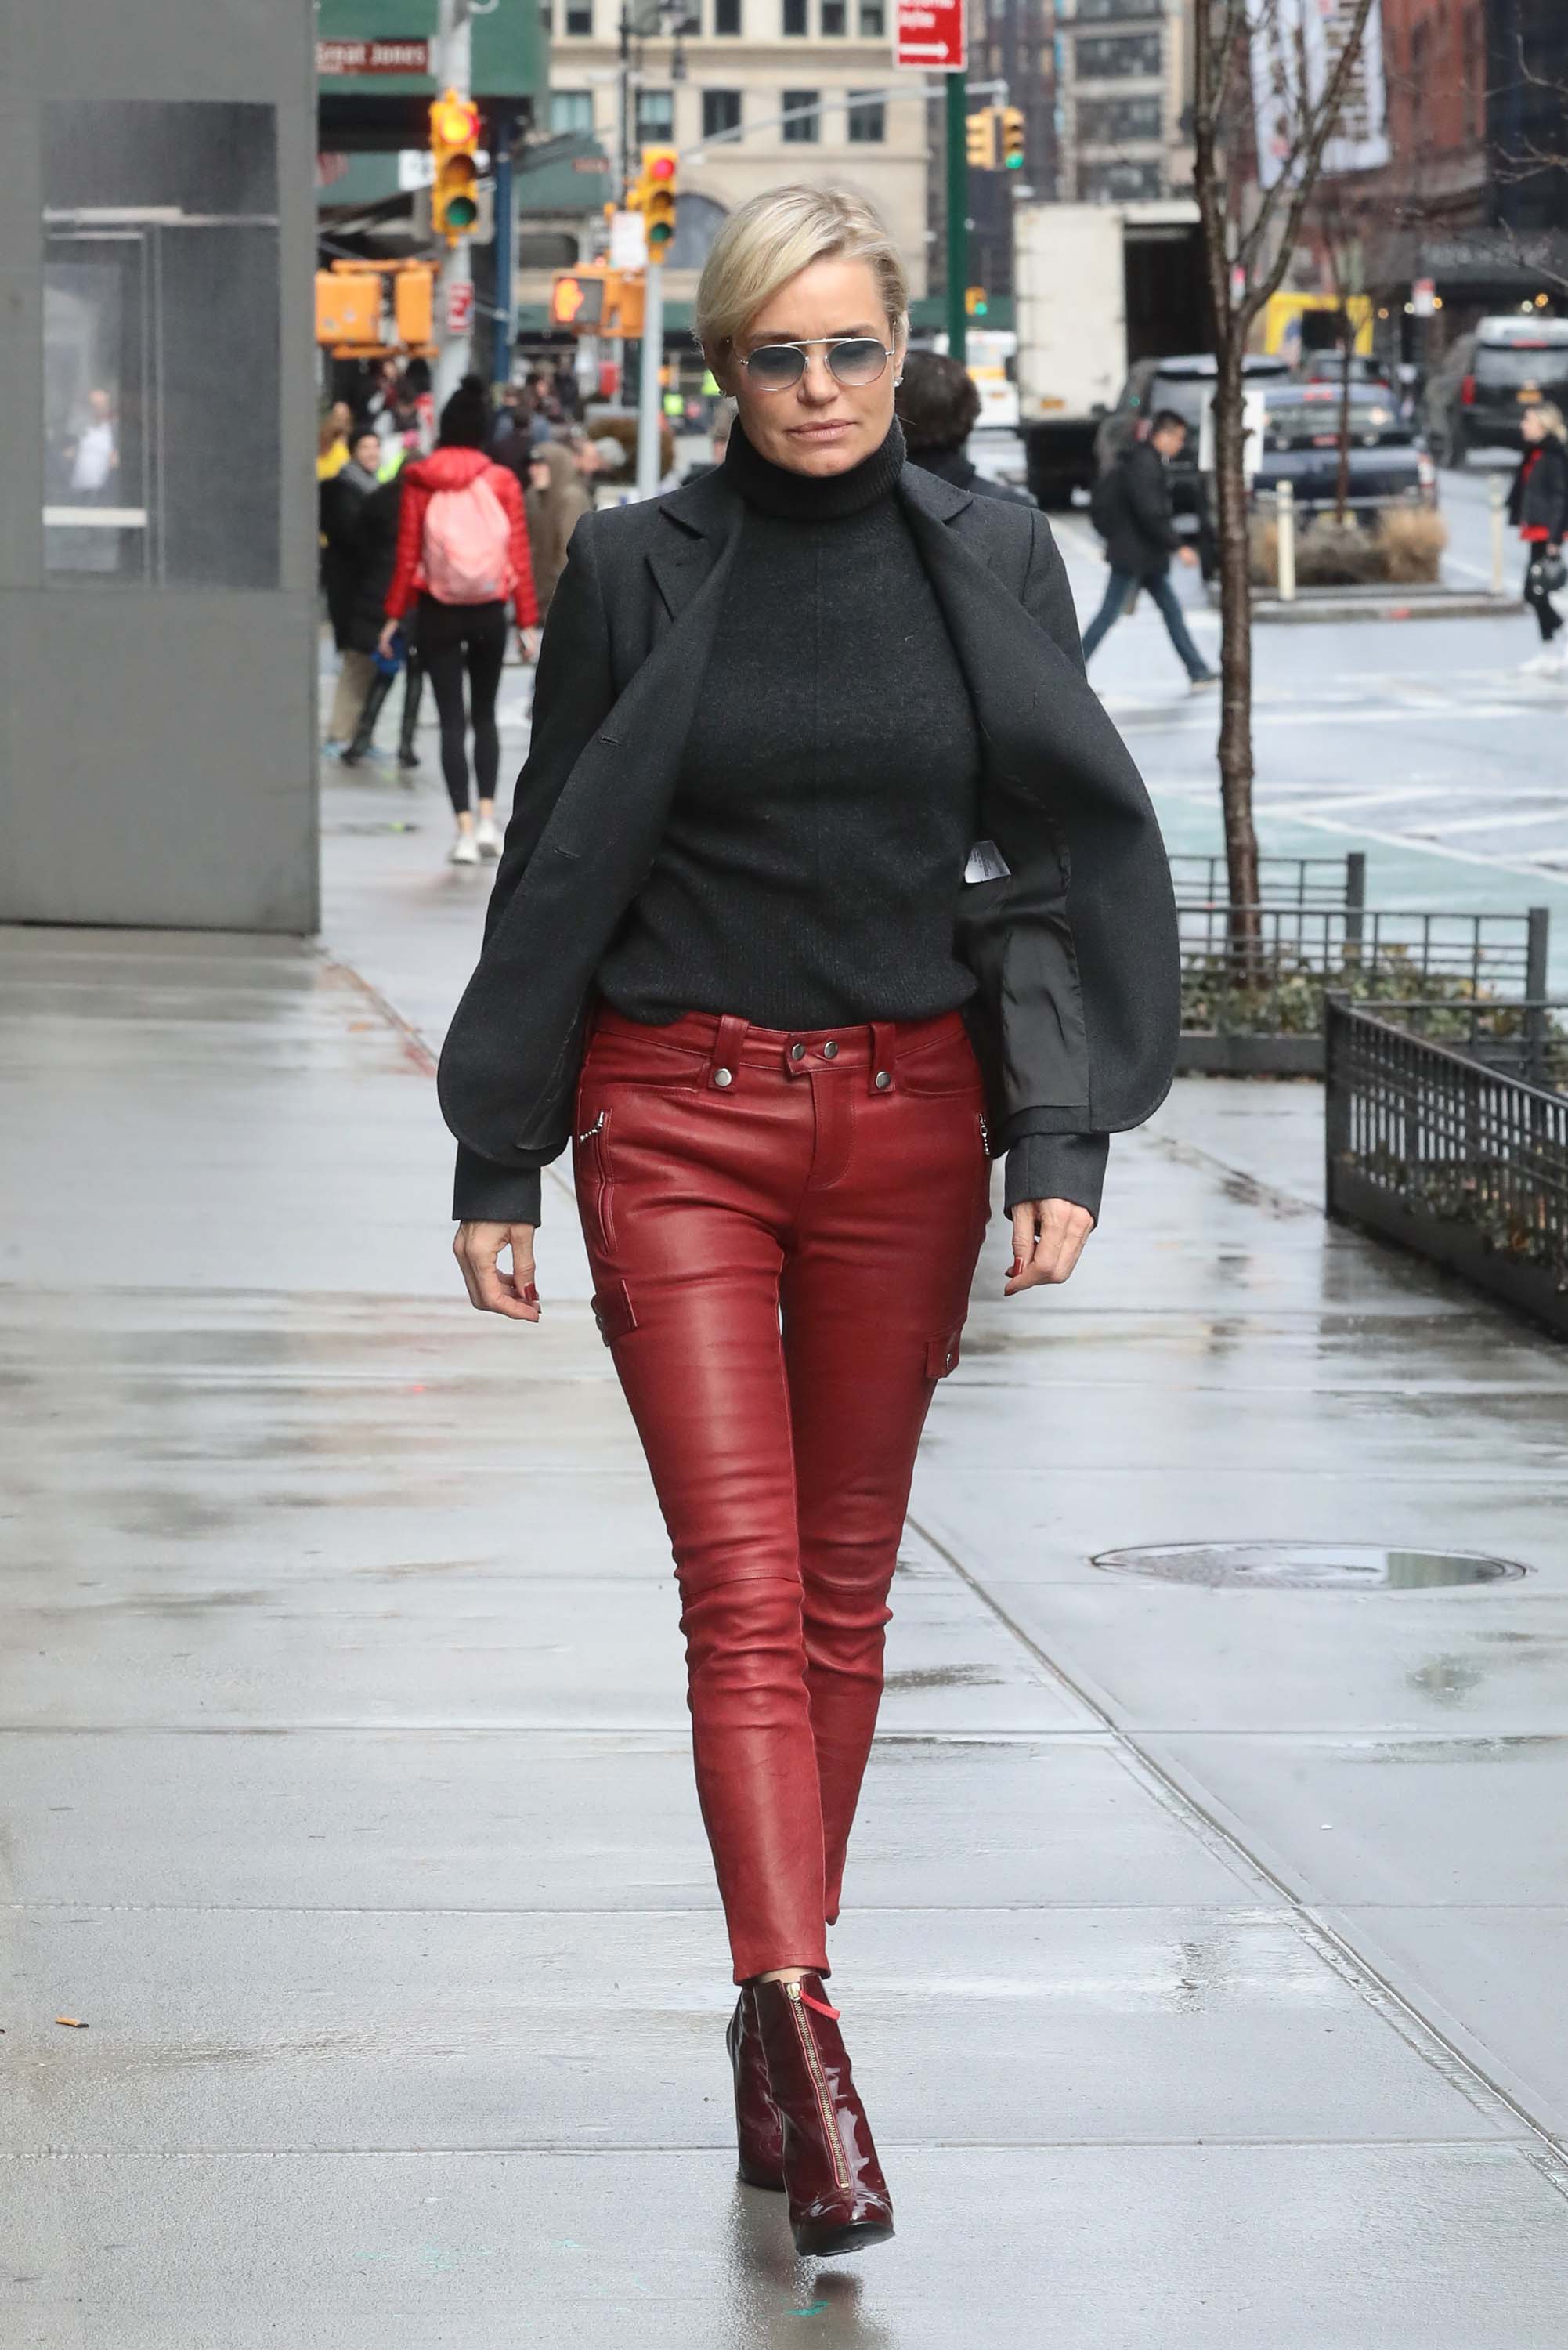 Yolanda Hadid out & about in NYC